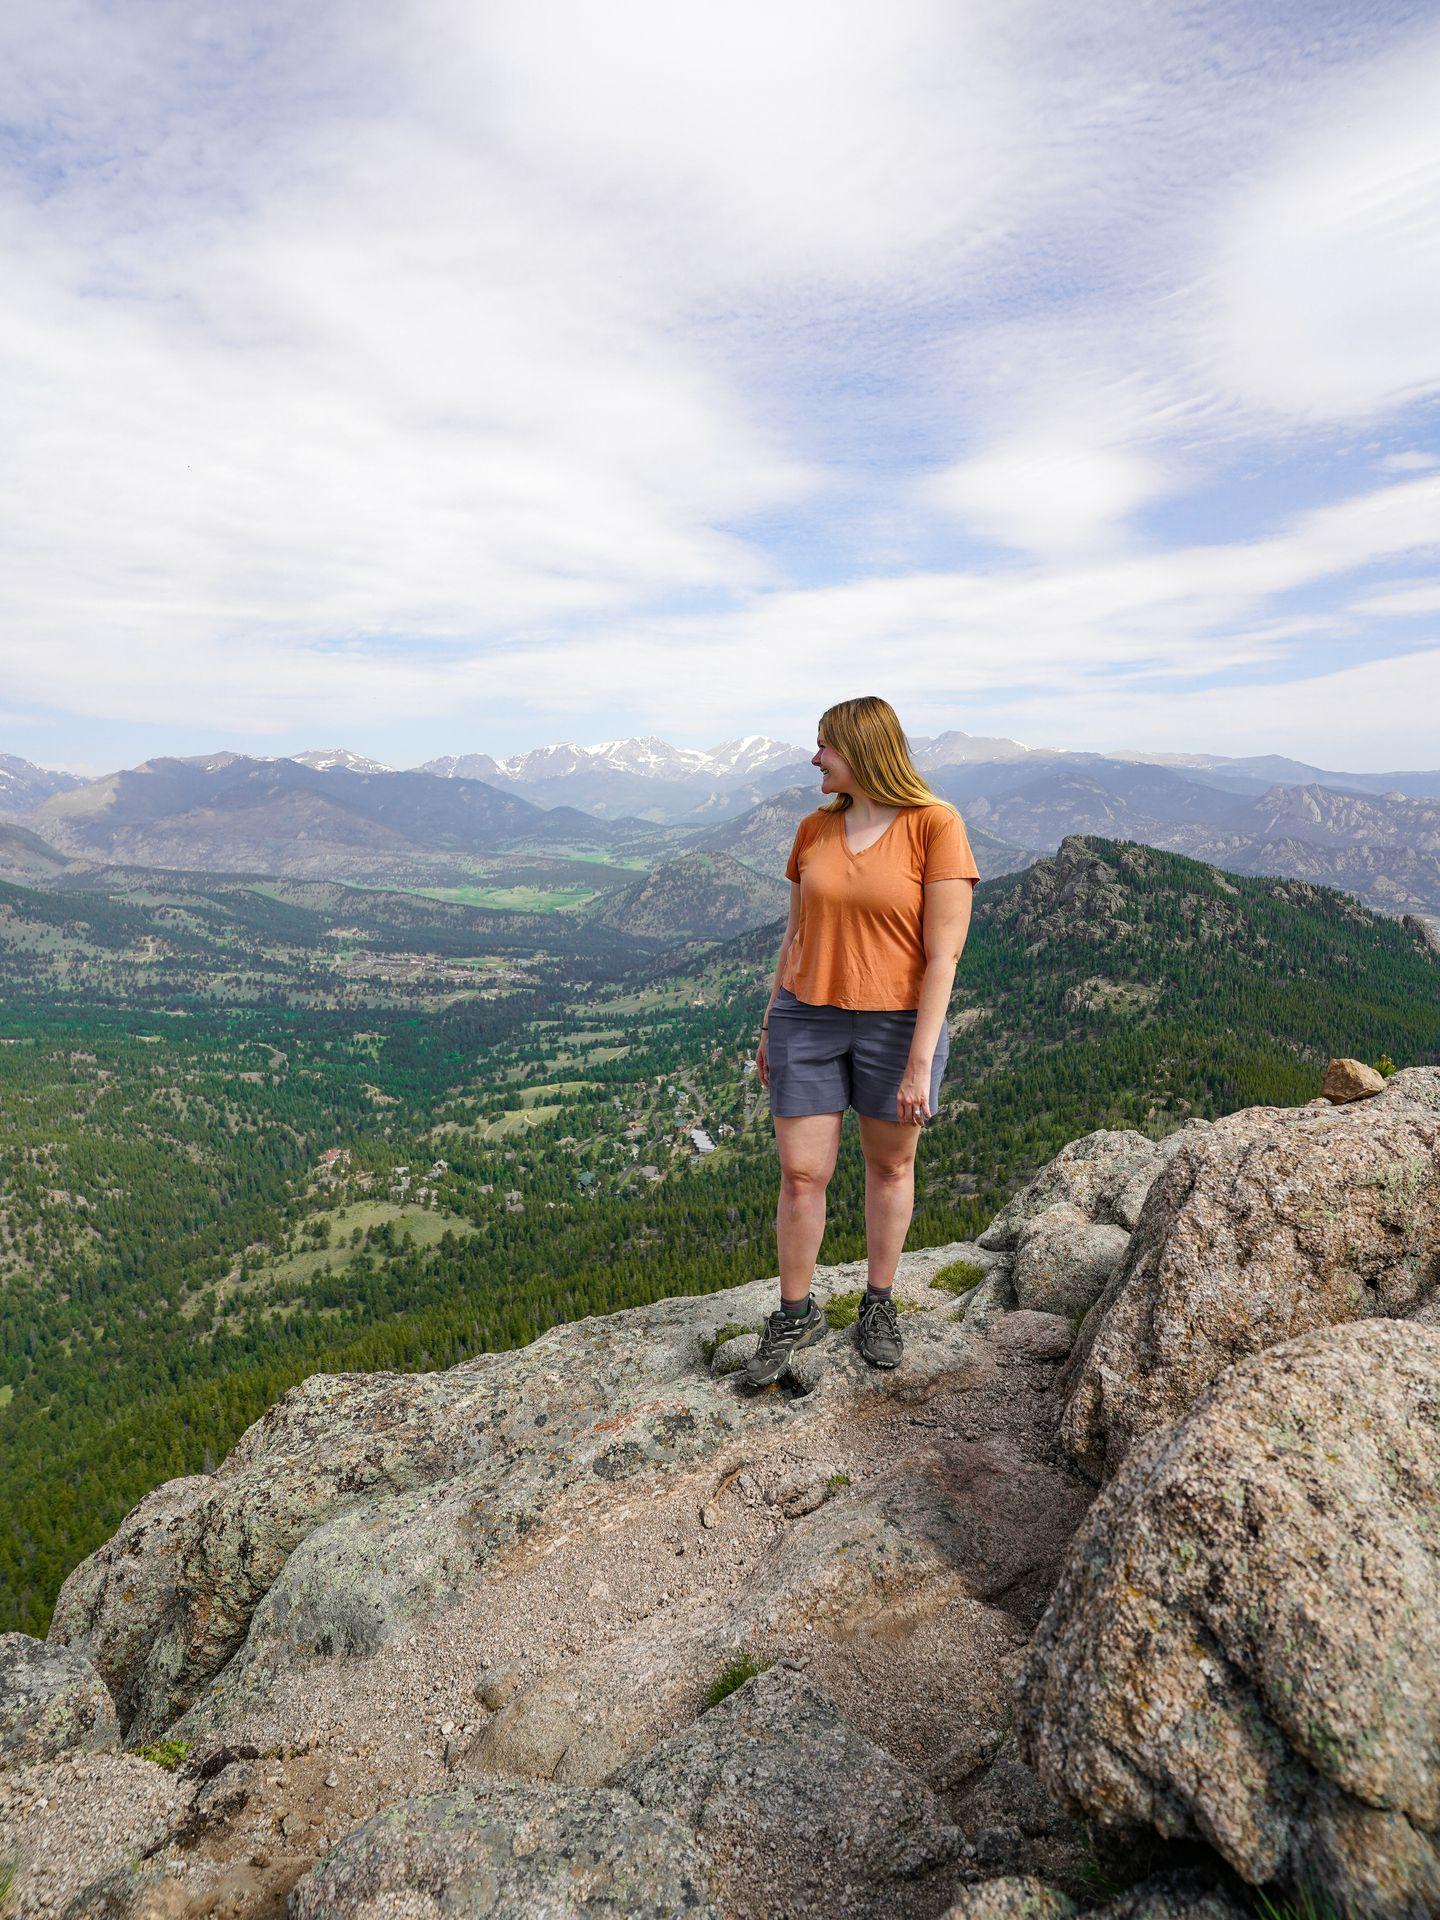 Lydia standing on a rocky mountain top wearing an orange shirt and blue shorts